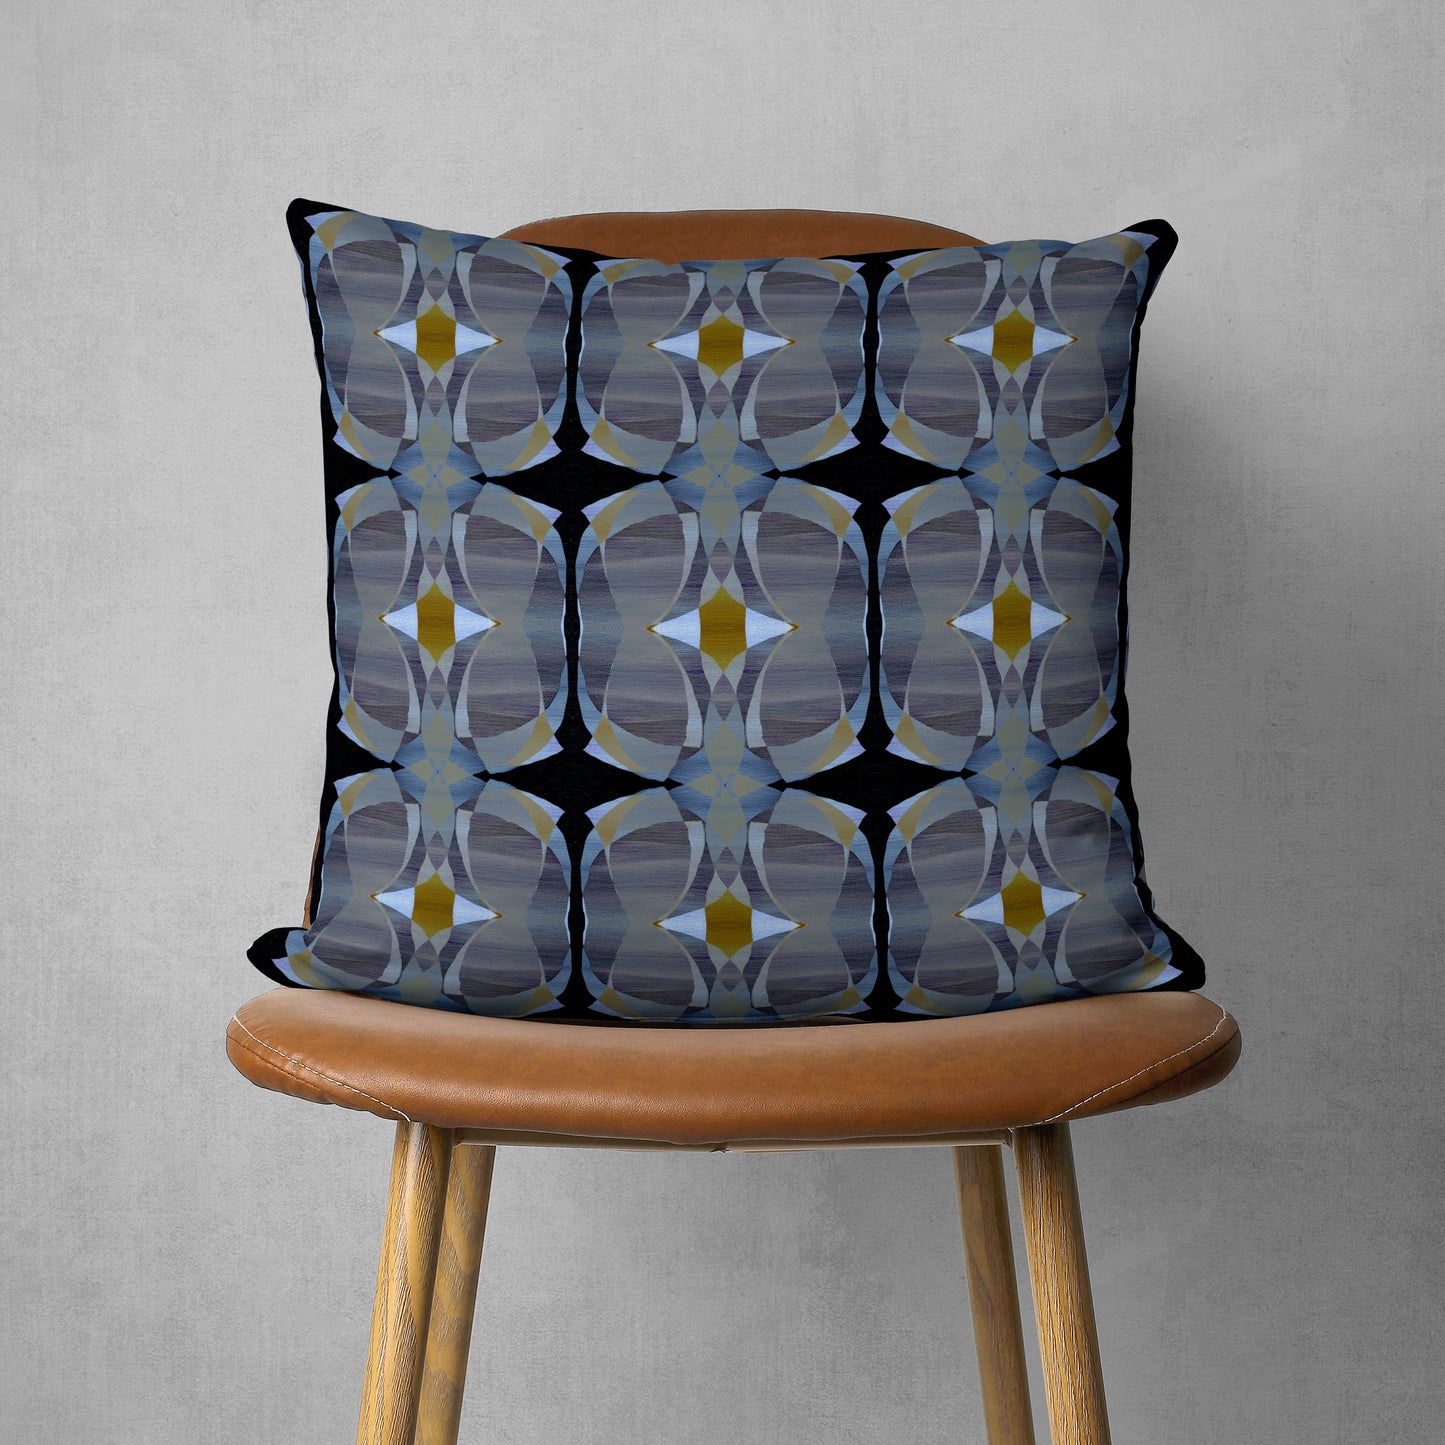 Gray and black abstract patterned pillow sitting on a brown chair